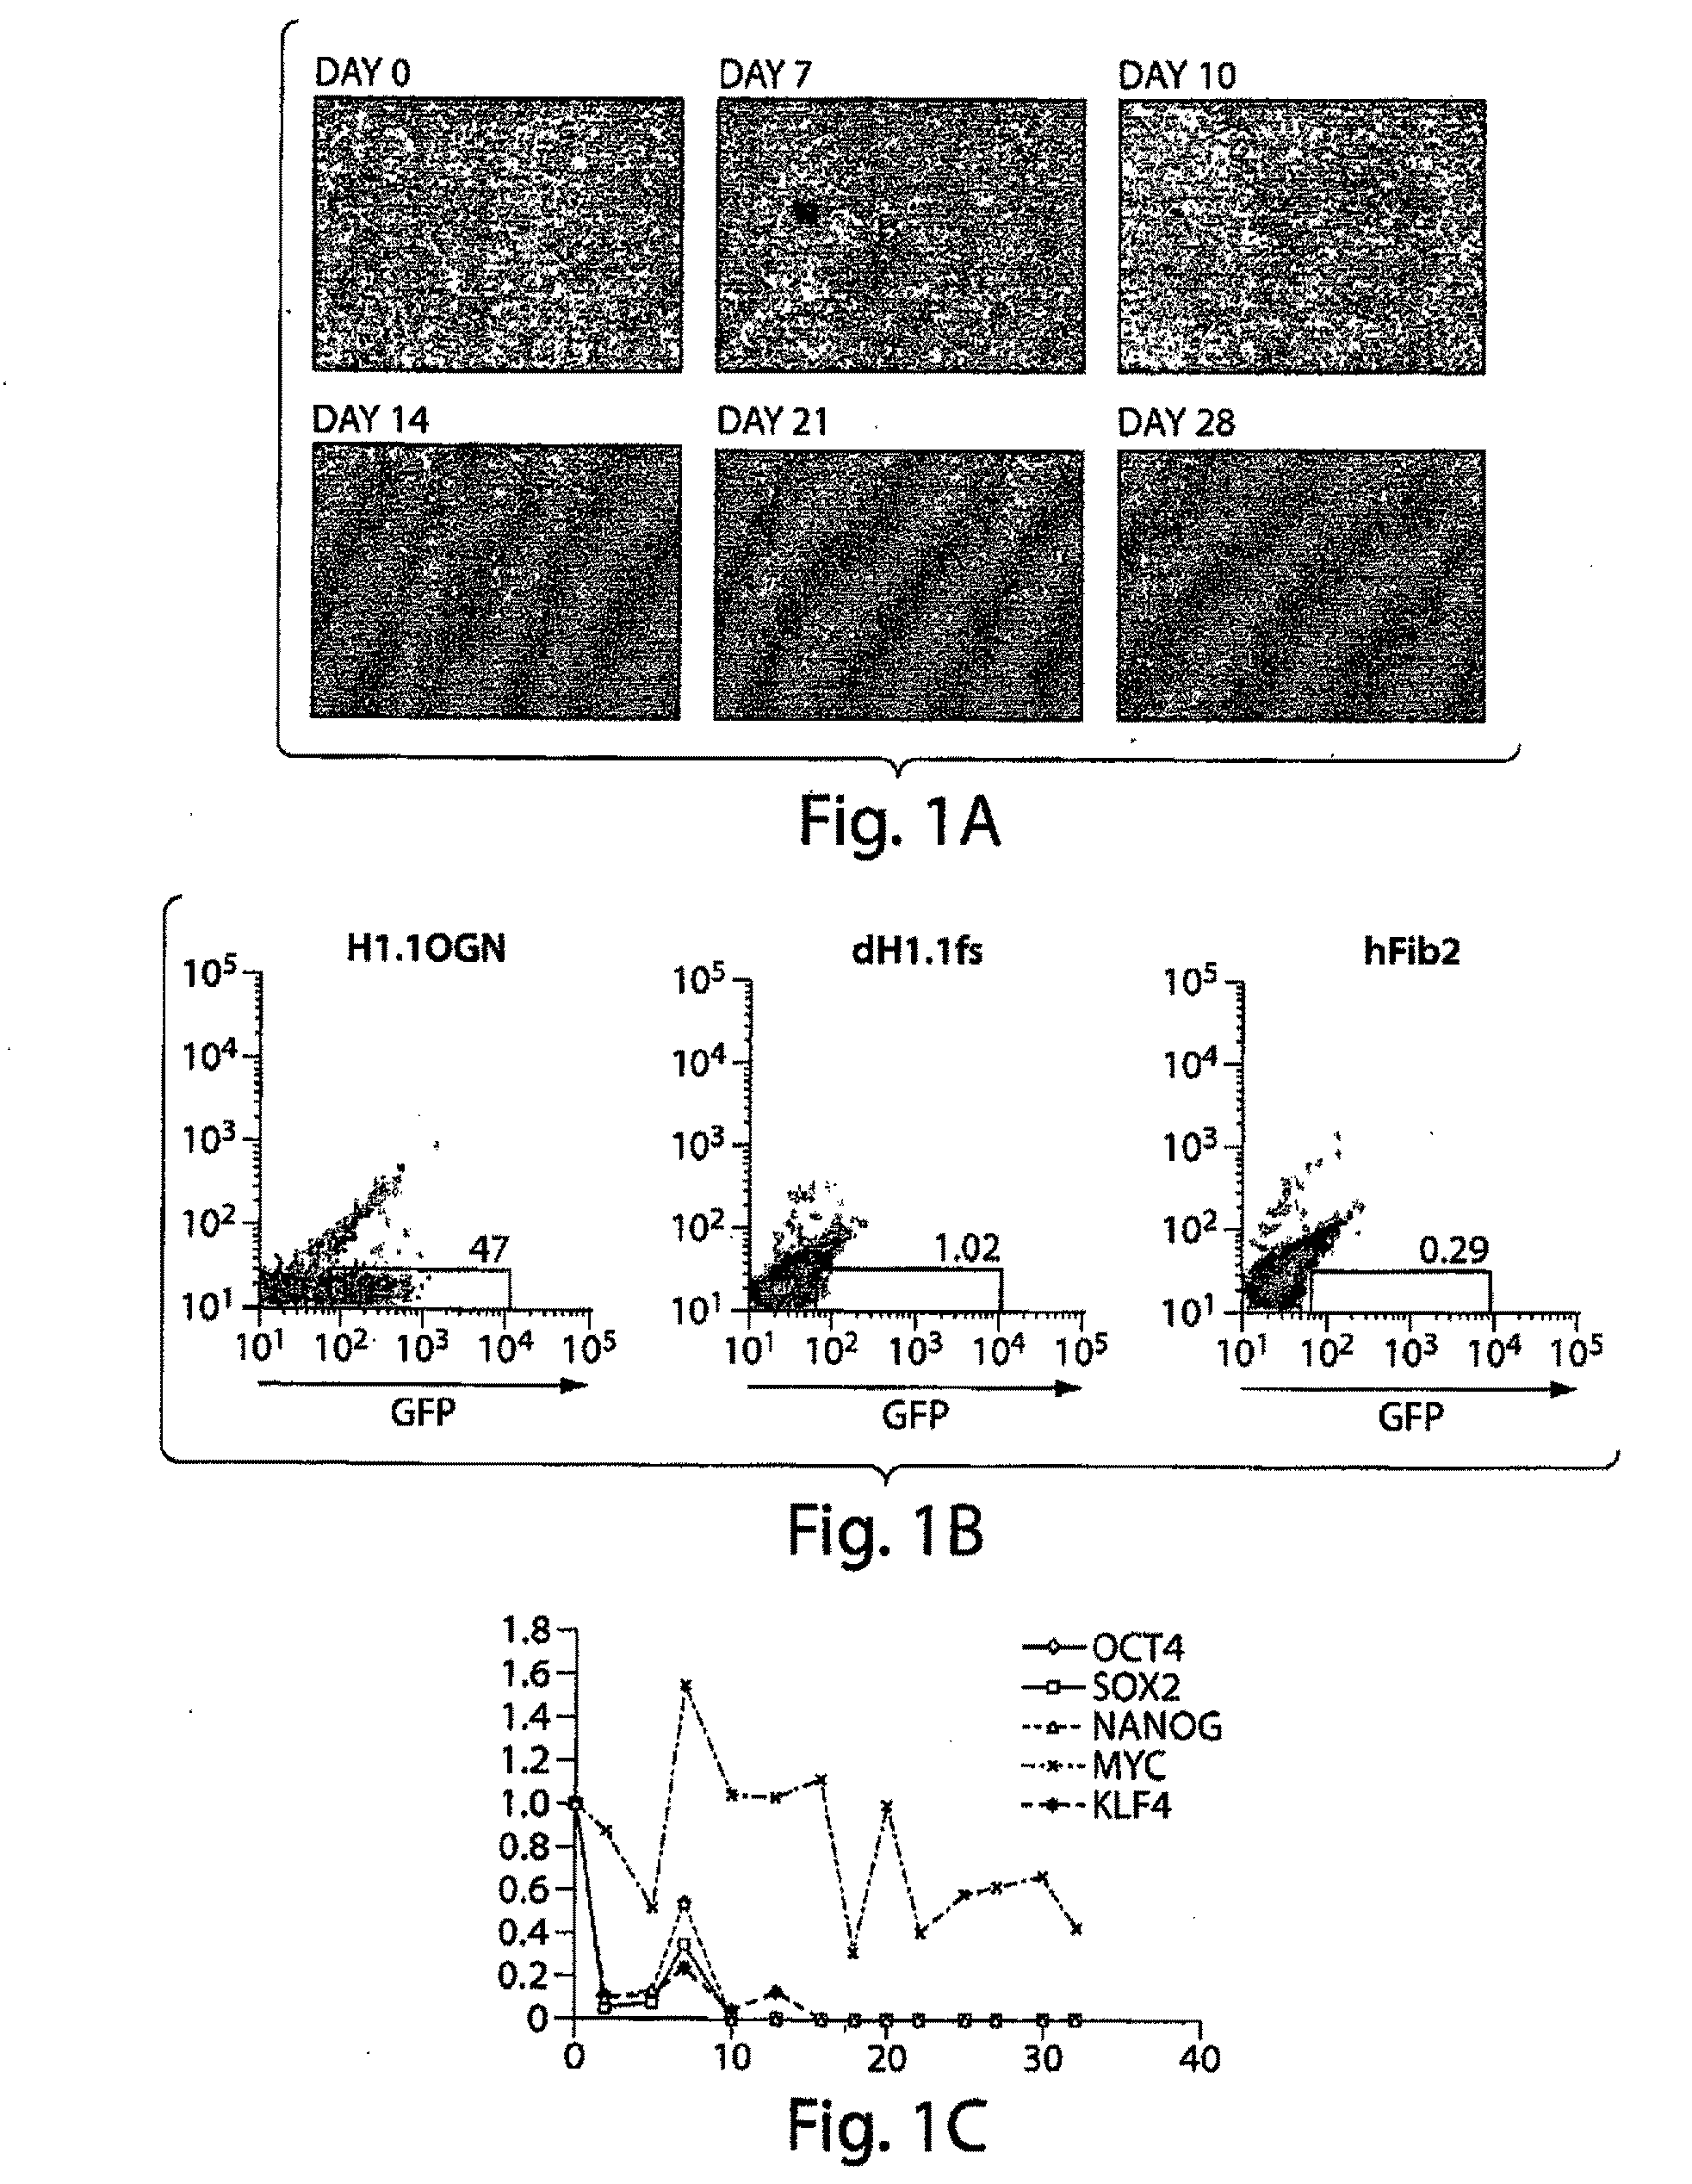 Method to produce induced pluripotent stem (IPS) cells from non-embryonic human cells